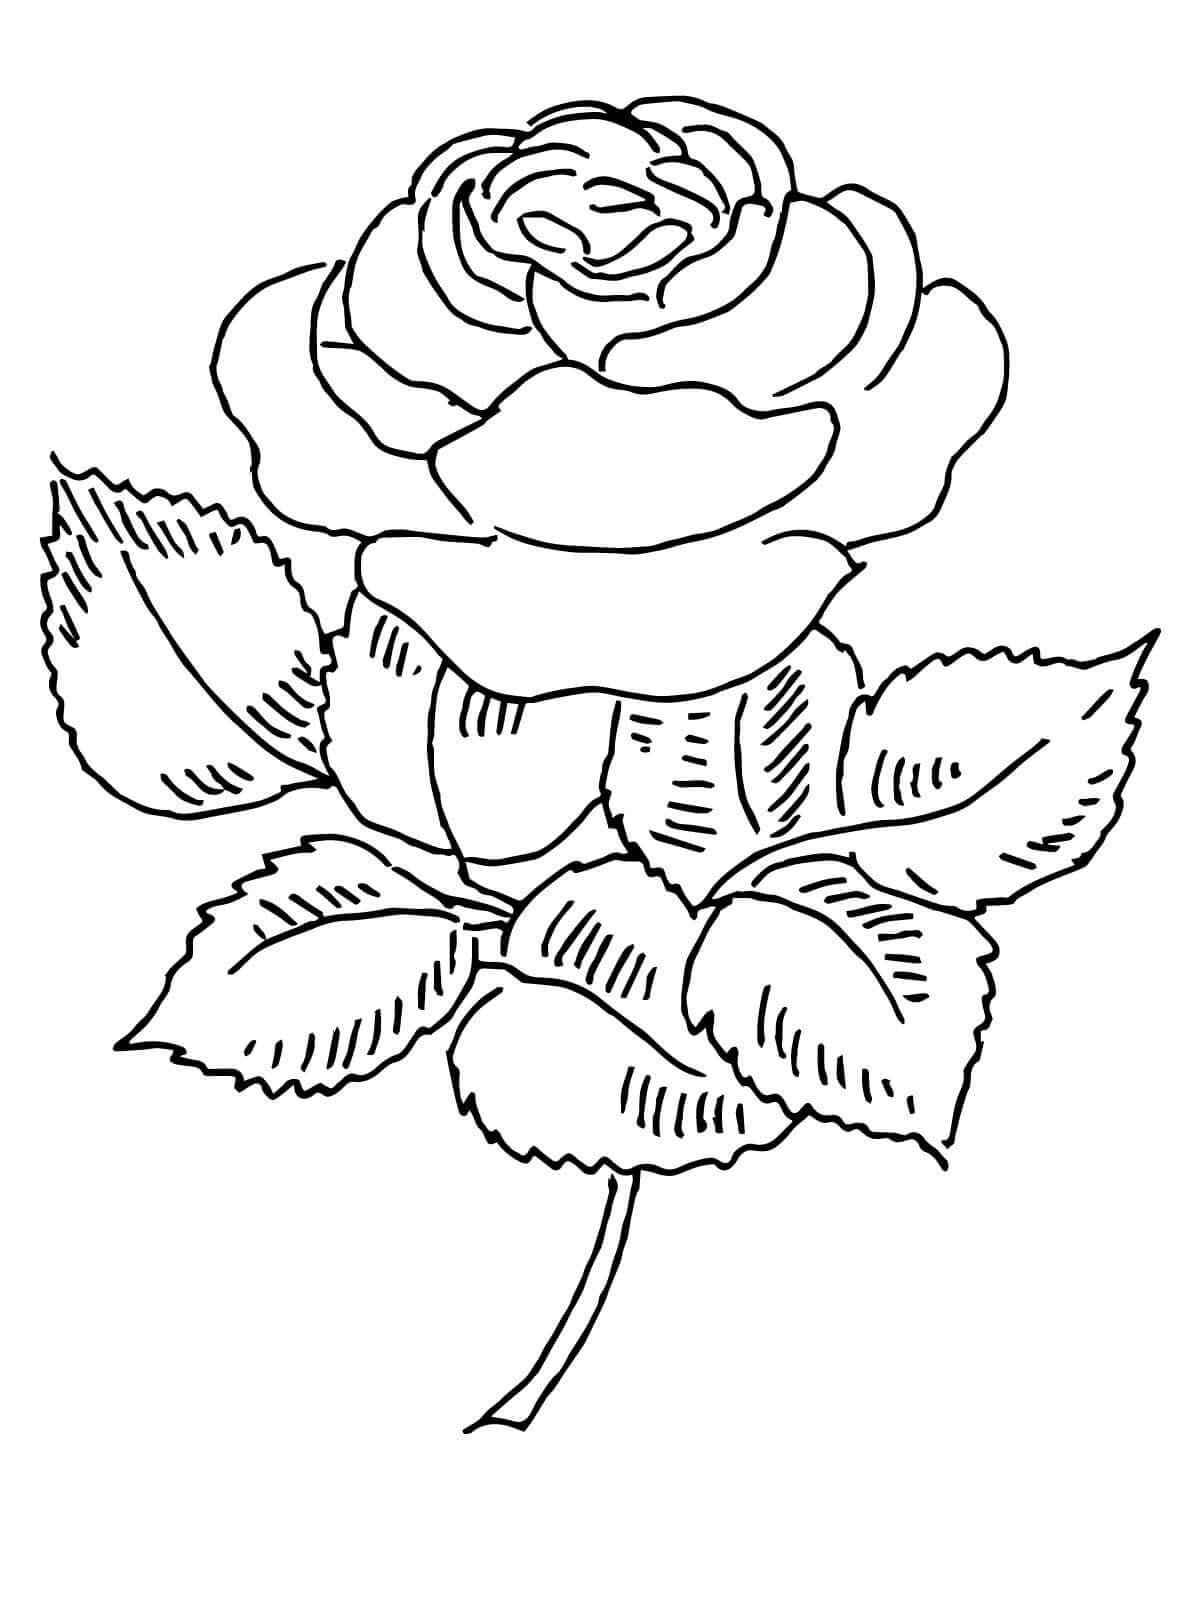 Rose coloring page